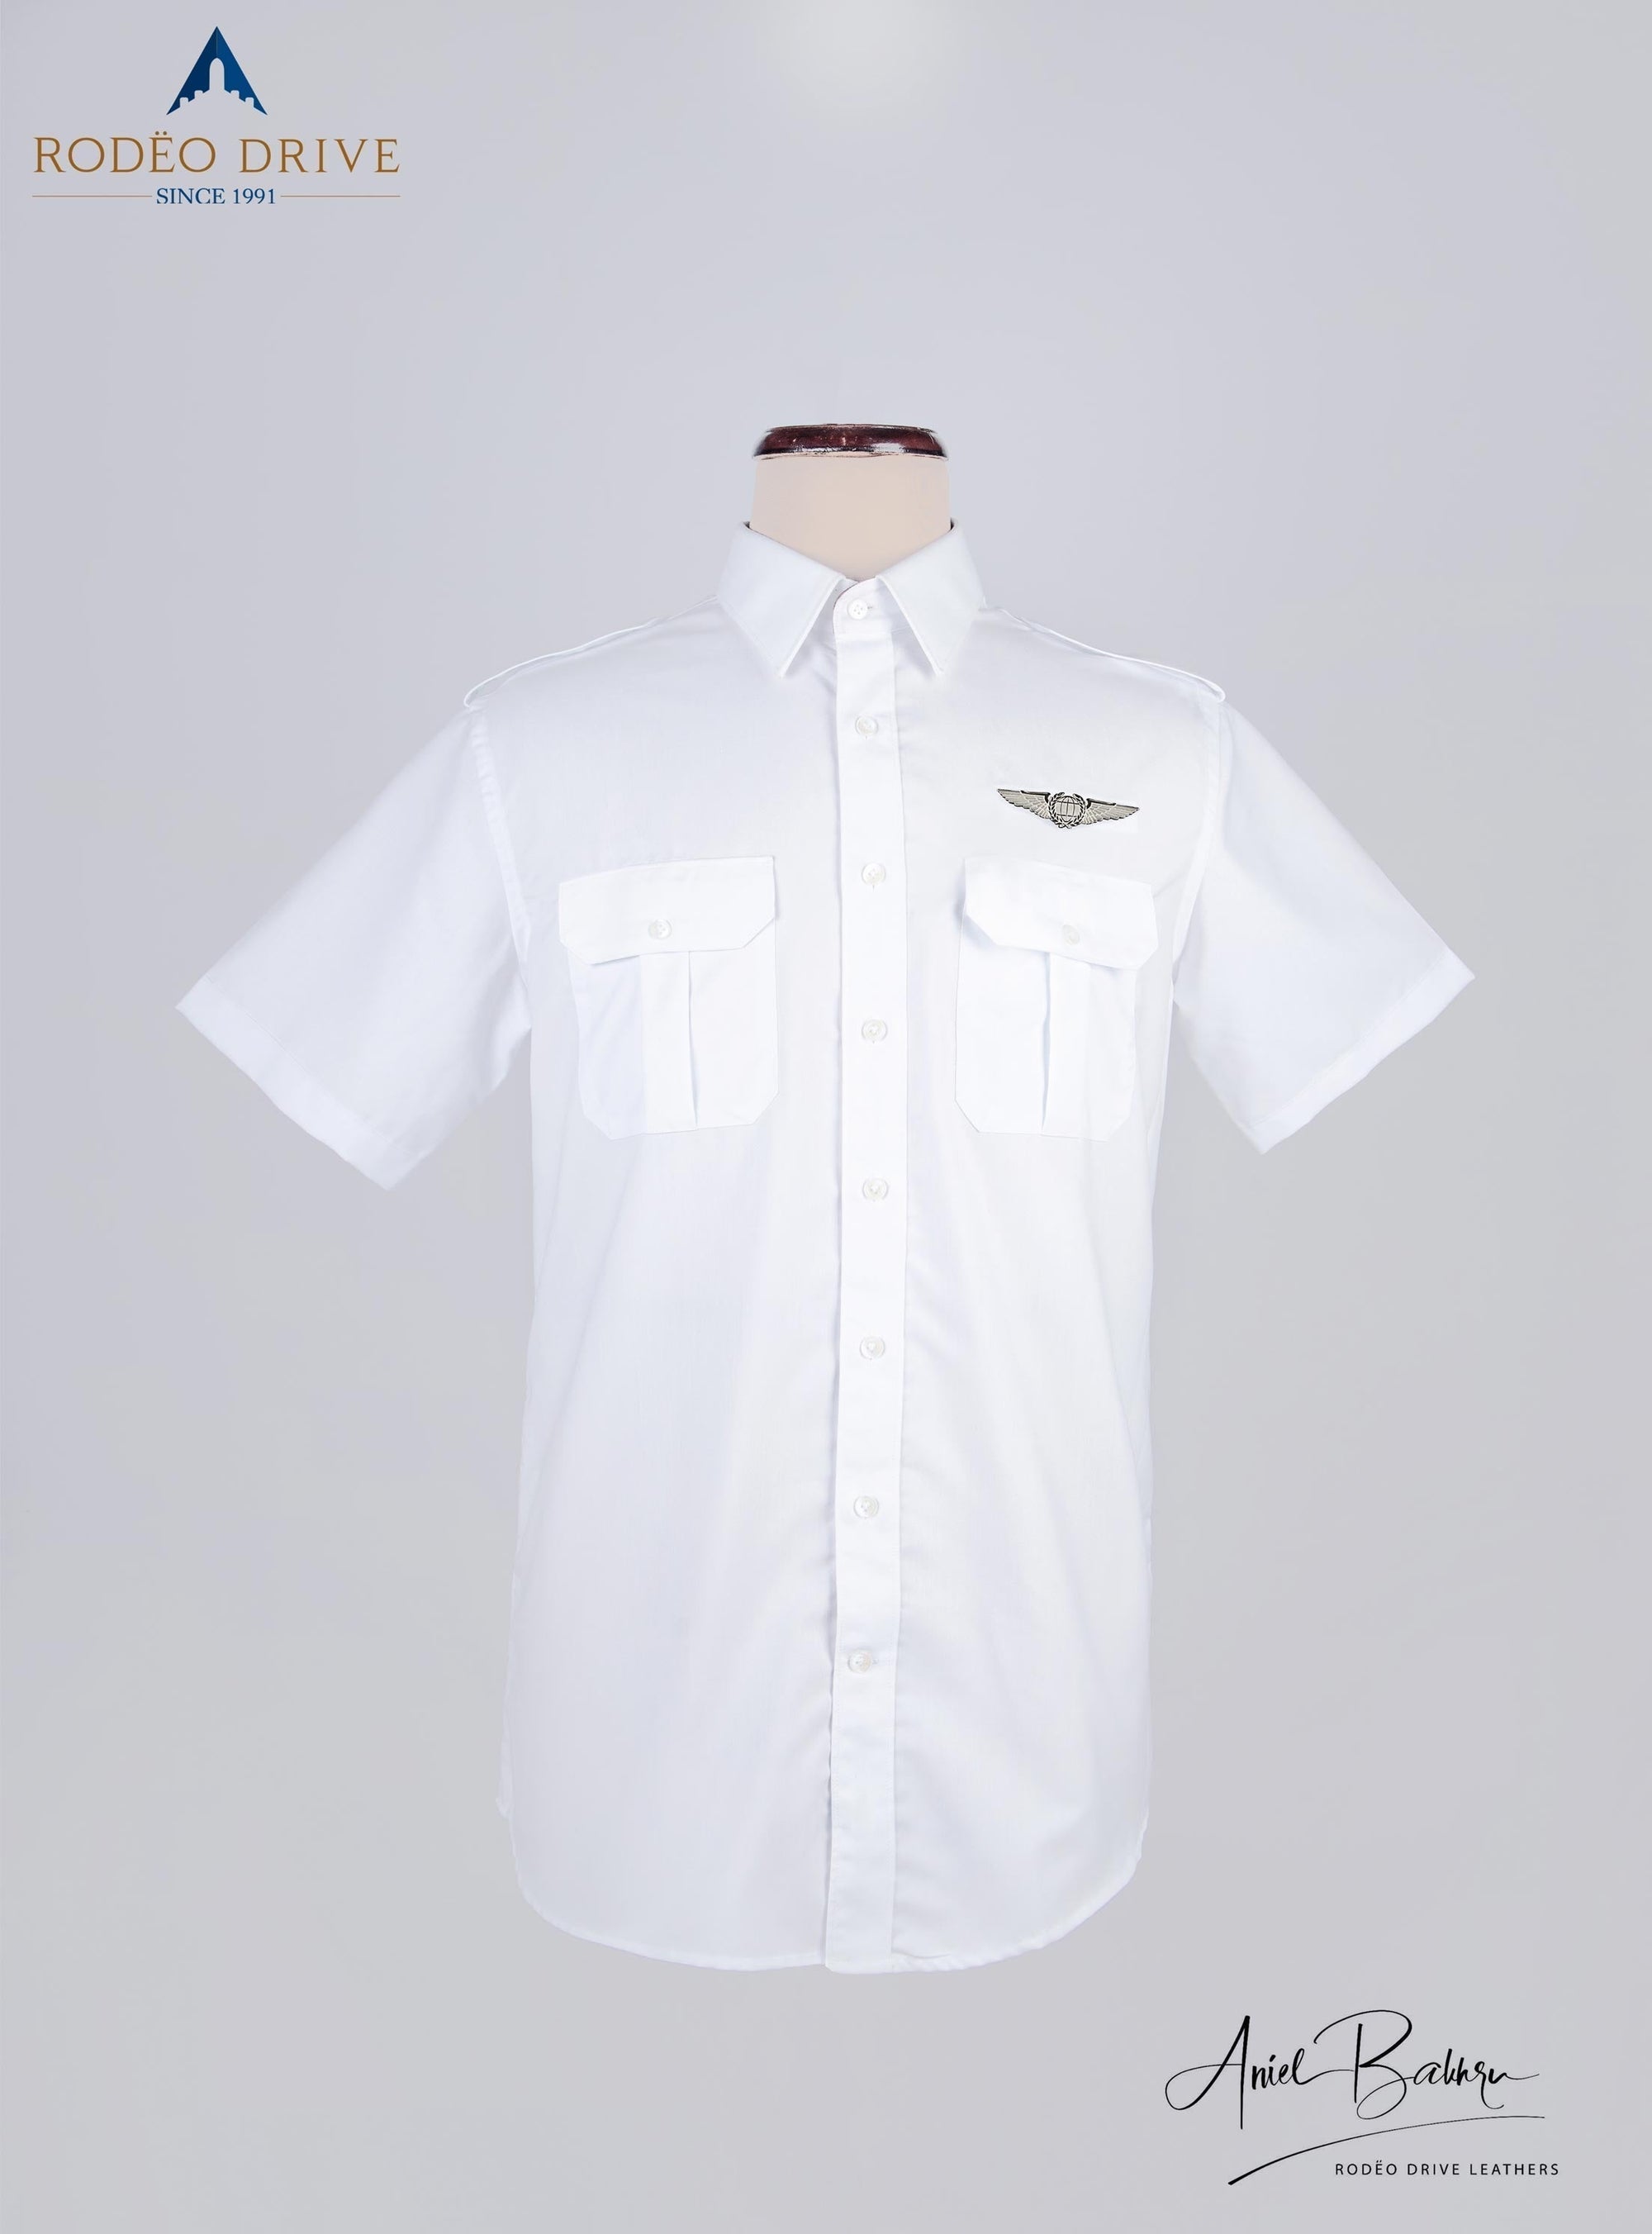 Front full image of white Standard Women's Pilot shirt displayed on mannequin